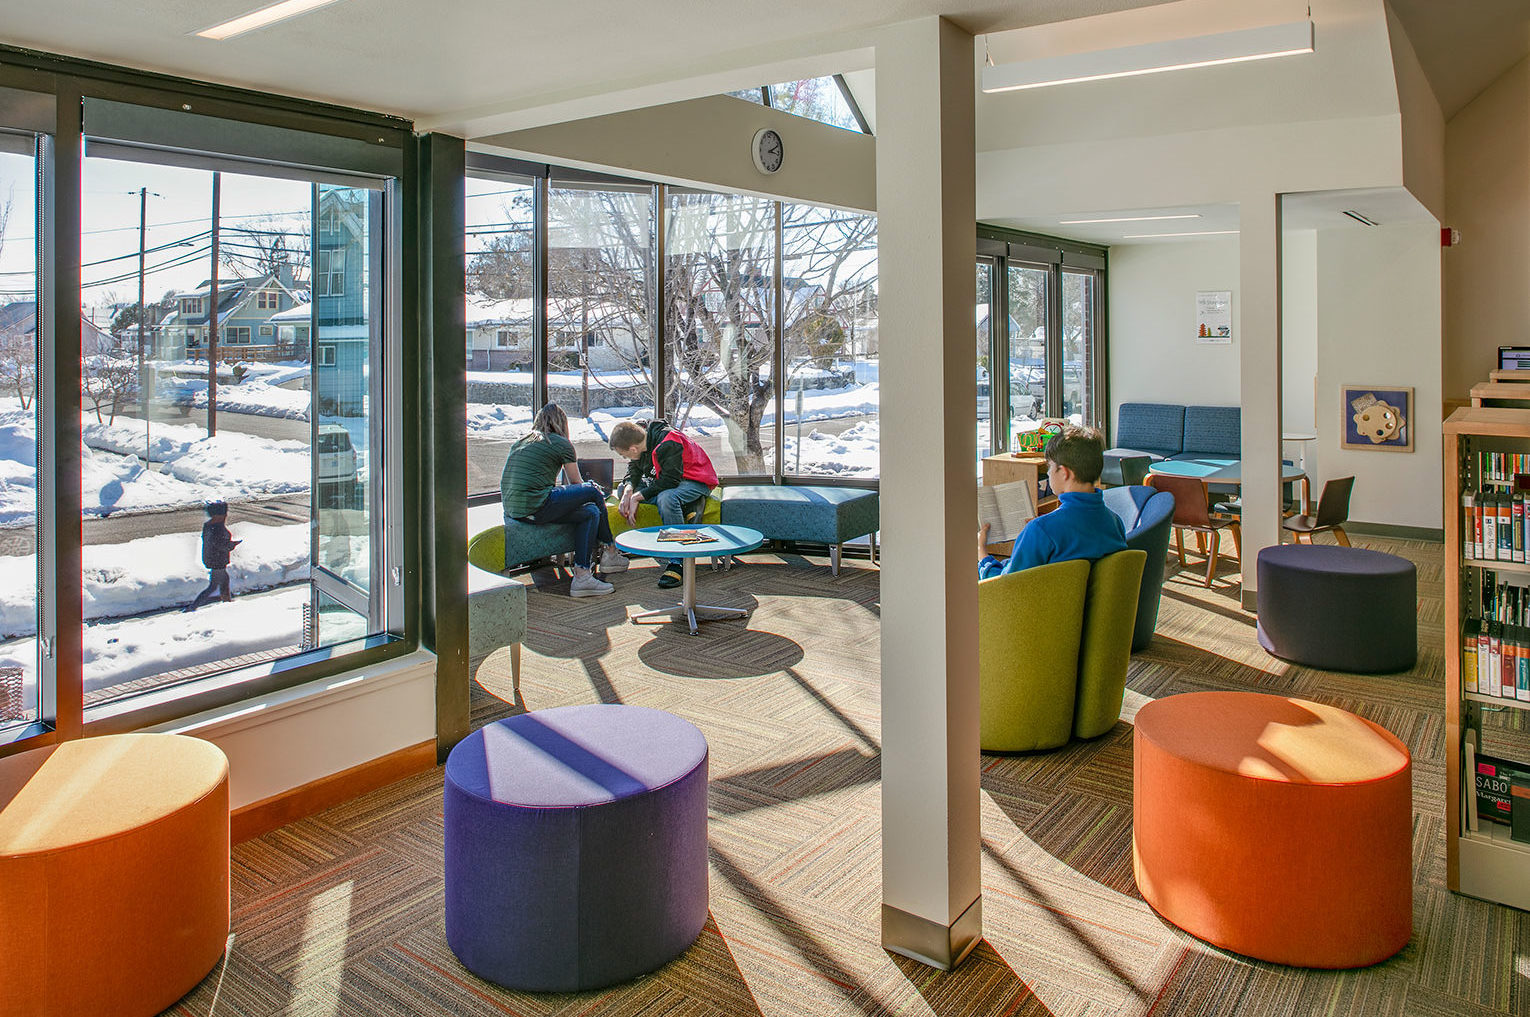 Goldendale Community Library Interior Renovations. Brightly daylit children's area in a library filled with colorful furniture and a rounded window seat. Snow on the grounds and street surrounding the building.